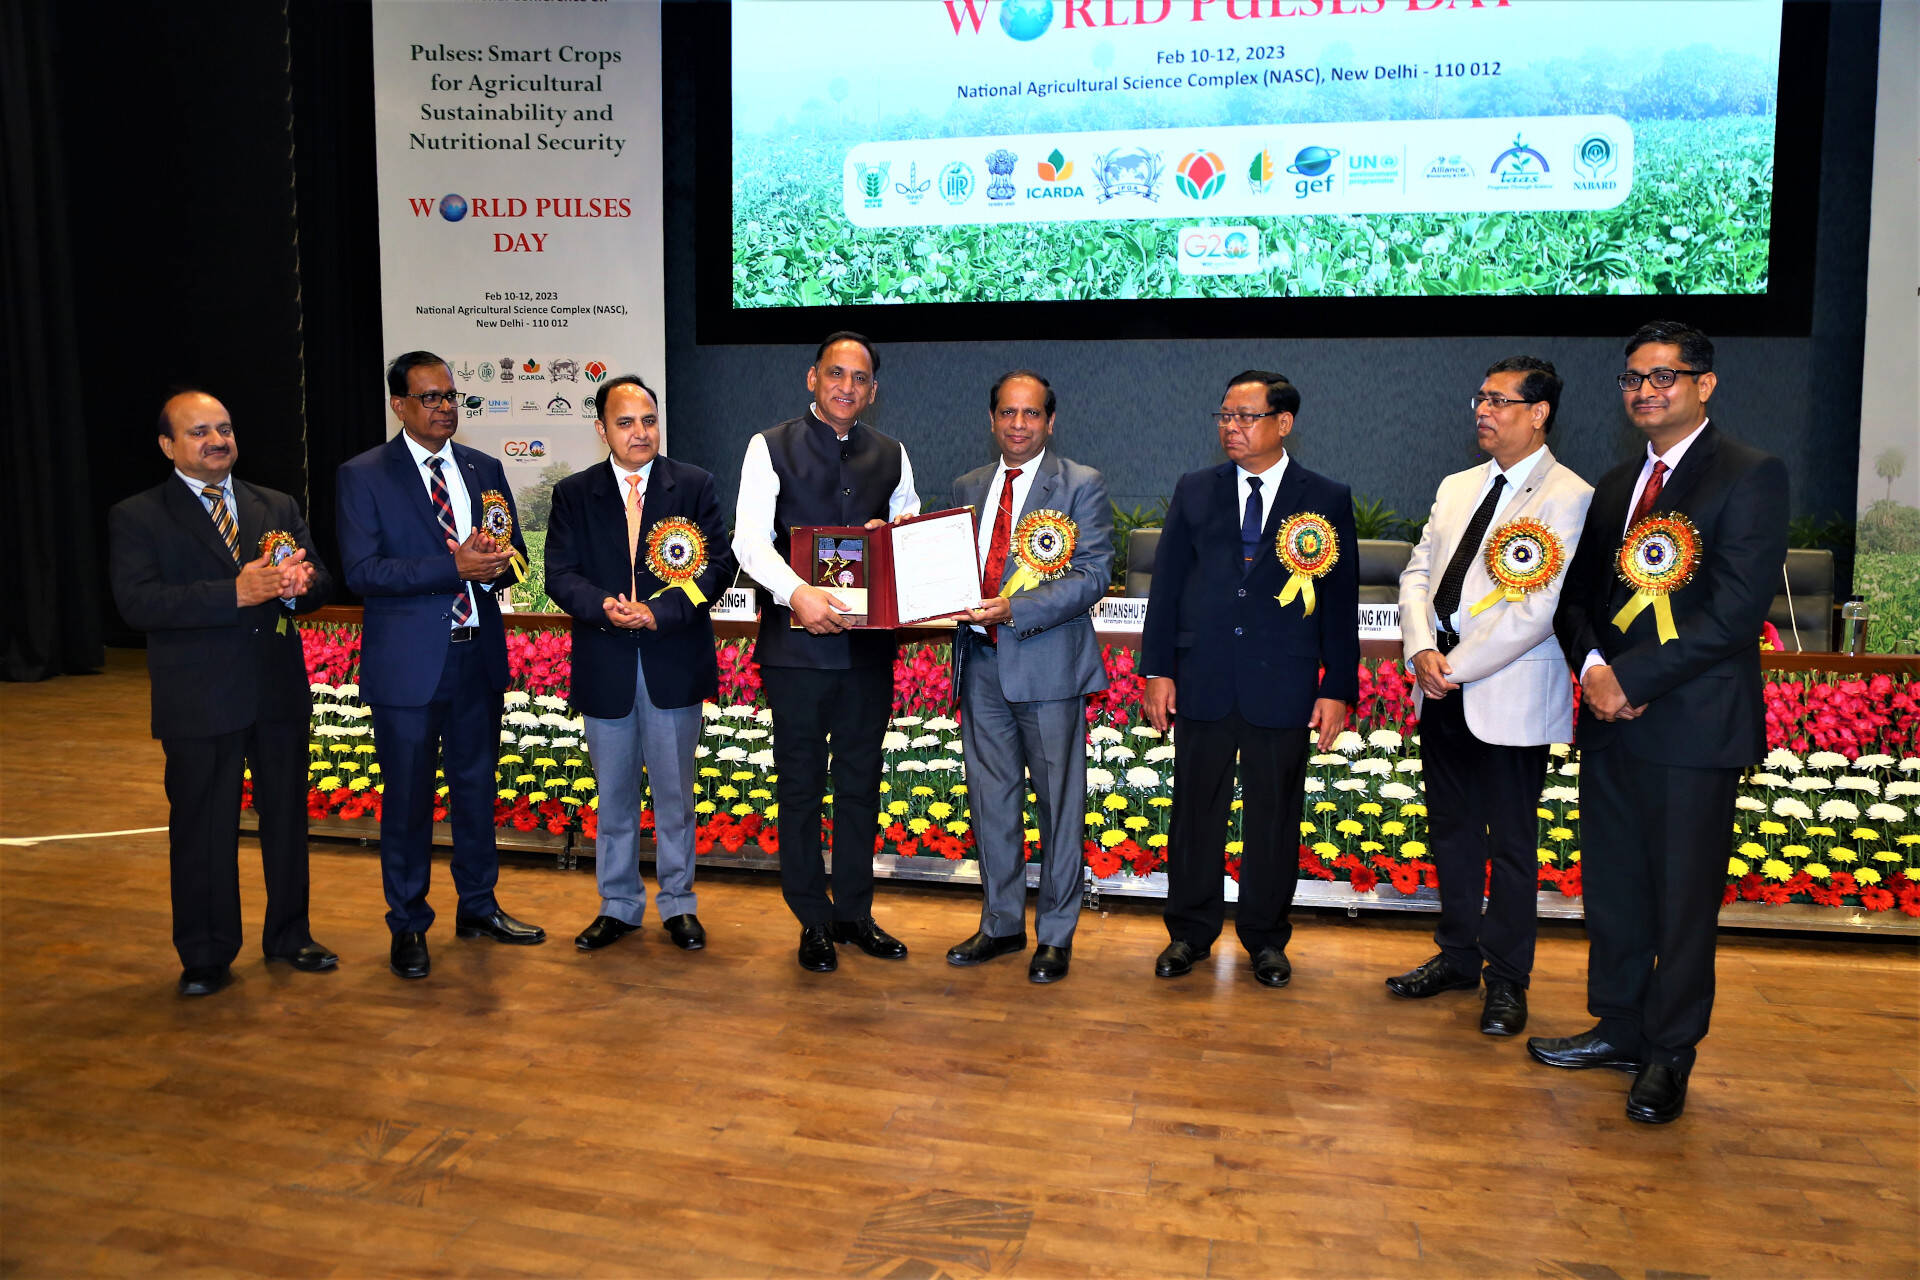  Excellence Award in the field of Pulses Improvement by the ISPRD and ICAR-IIPR on World Pulses Day 2023